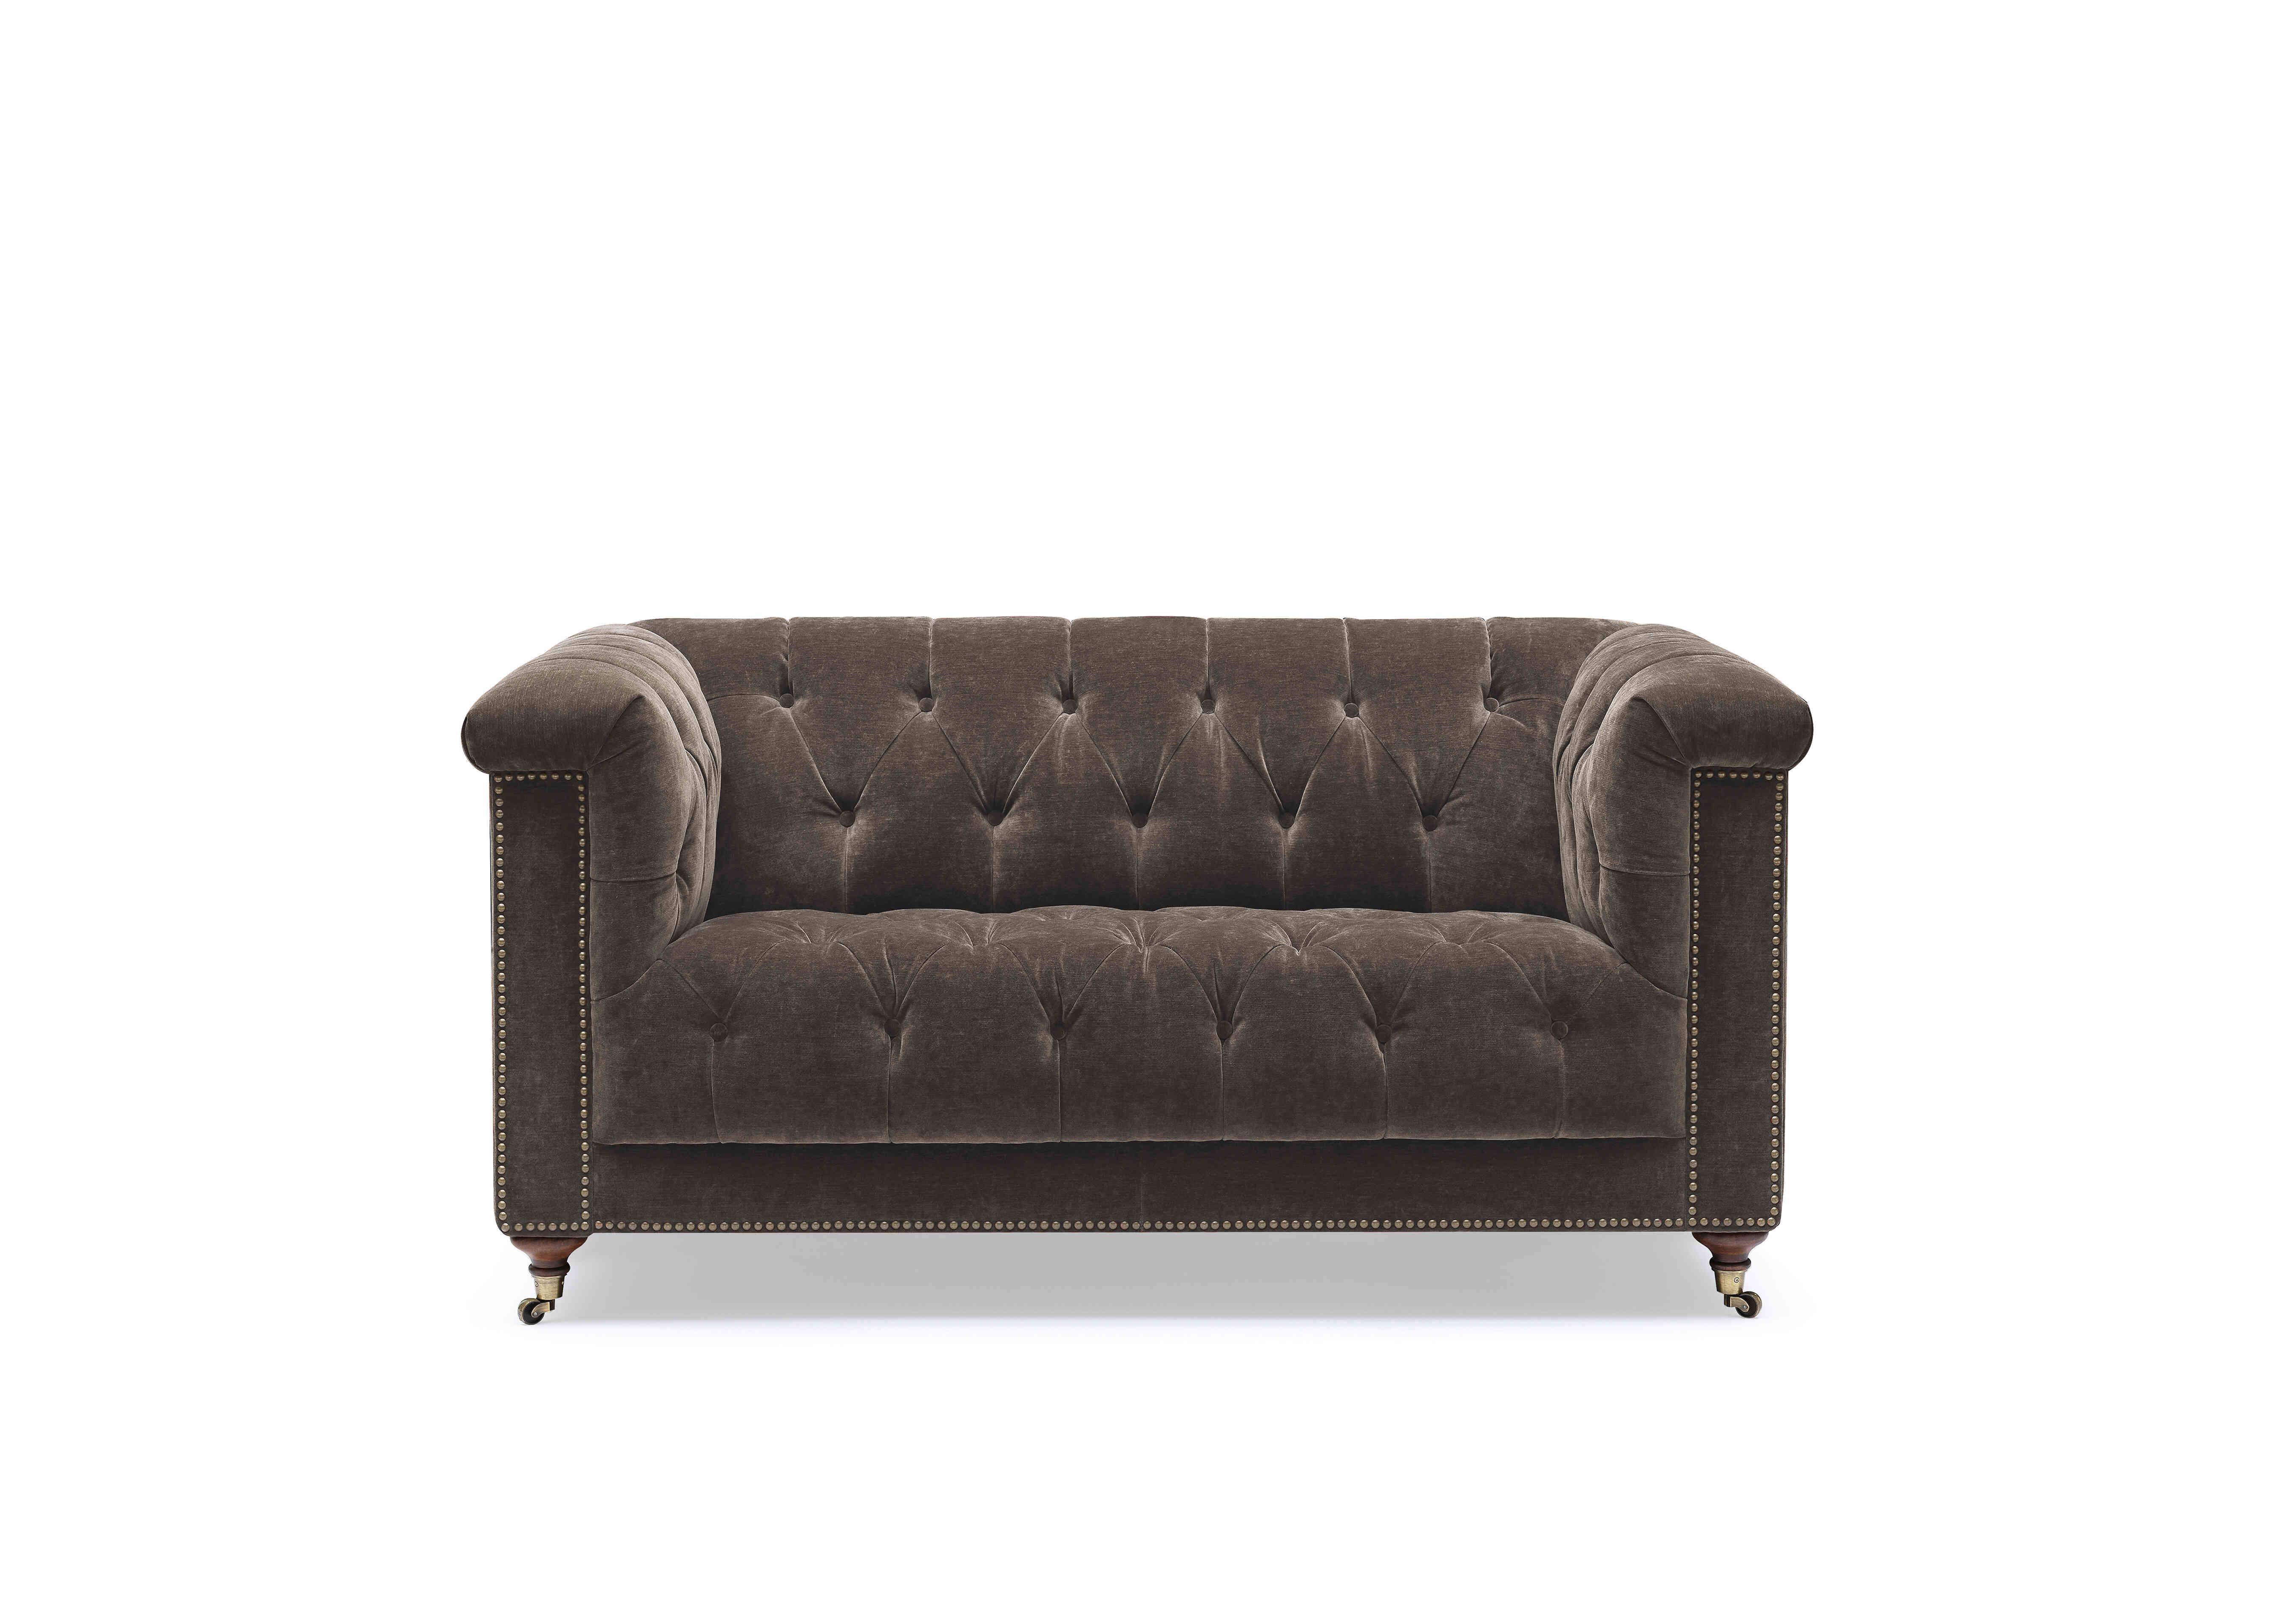 Wallace 2 Seater Fabric Chesterfield Sofa in X3y1-W020 Brindle on Furniture Village